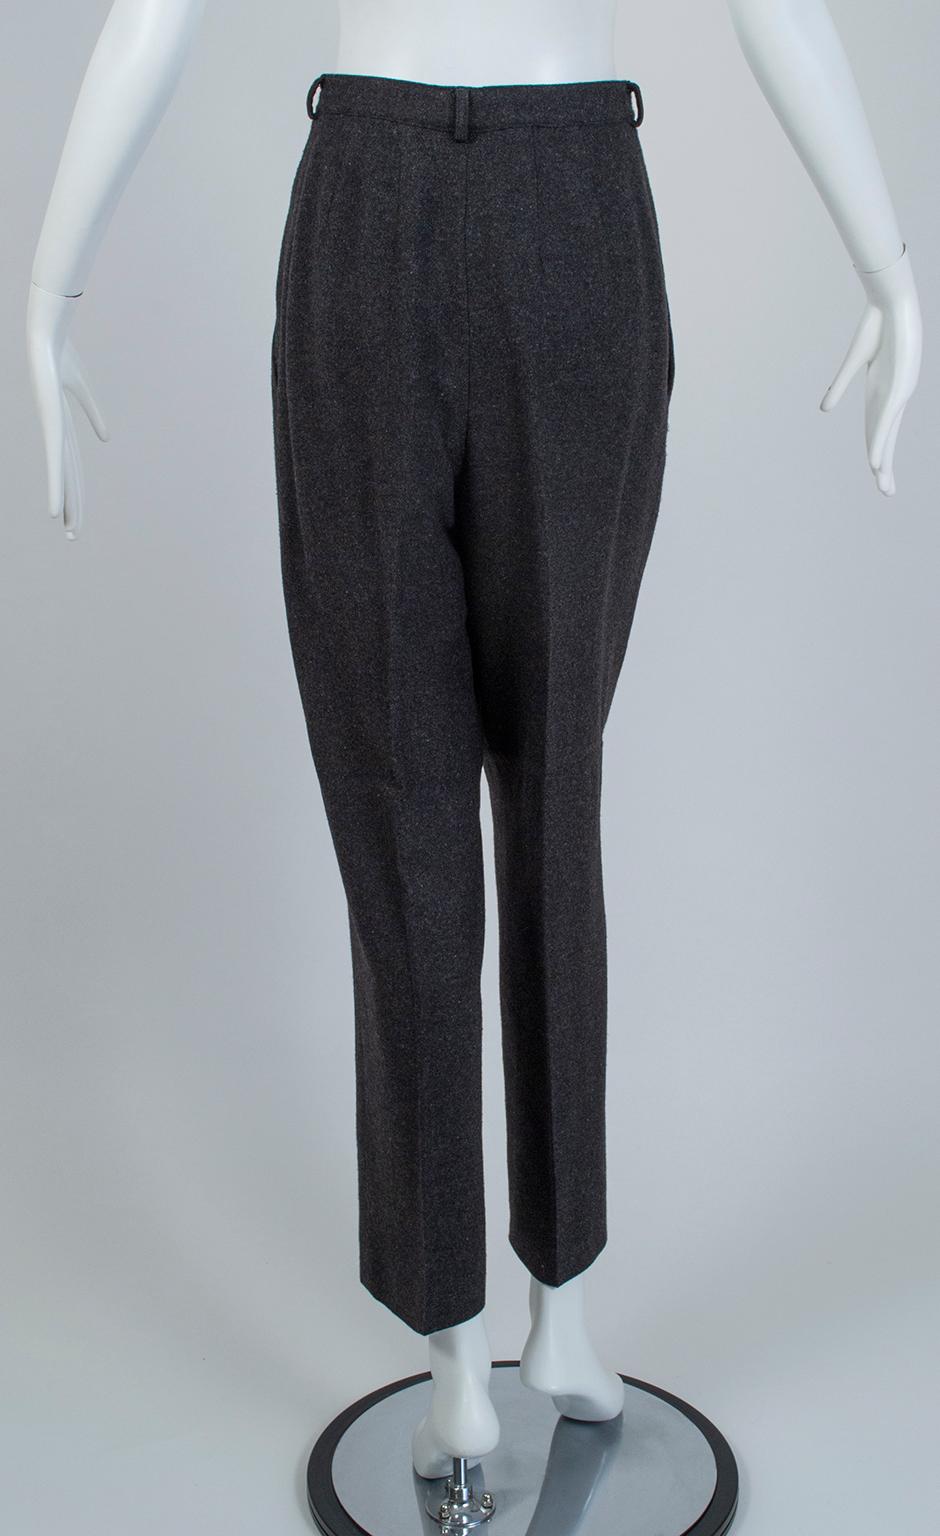 Donna Karan Charcoal Gray Teddy Bear Cashmere and Alpaca Pant Suit - M, 1990s For Sale 3